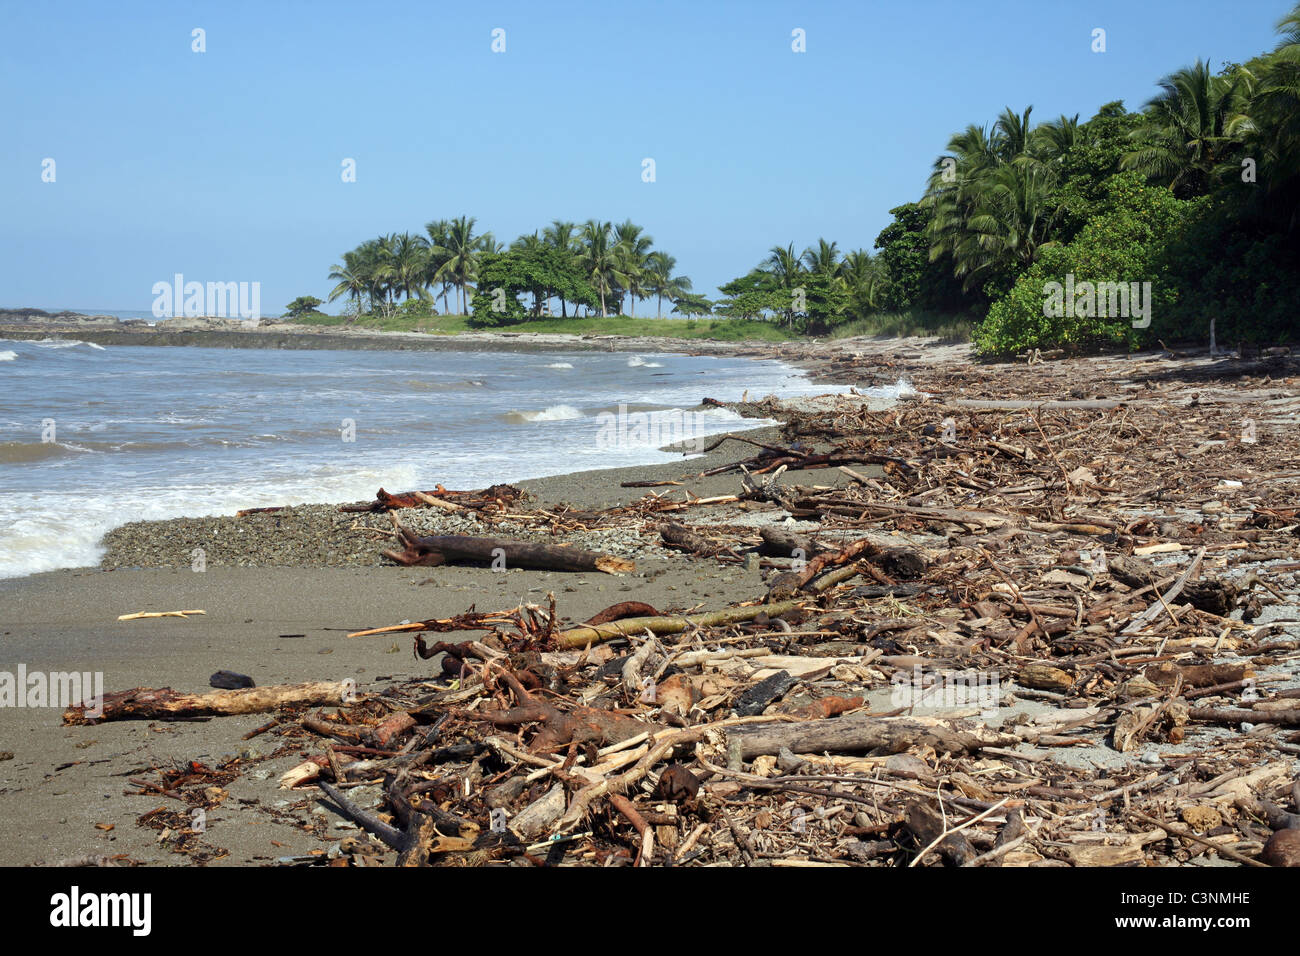 Beach covered in driftwood from recent heavy rain, which swelled the rivers. Mal Pais, Puntarenas, Costa Rica, Central America Stock Photo